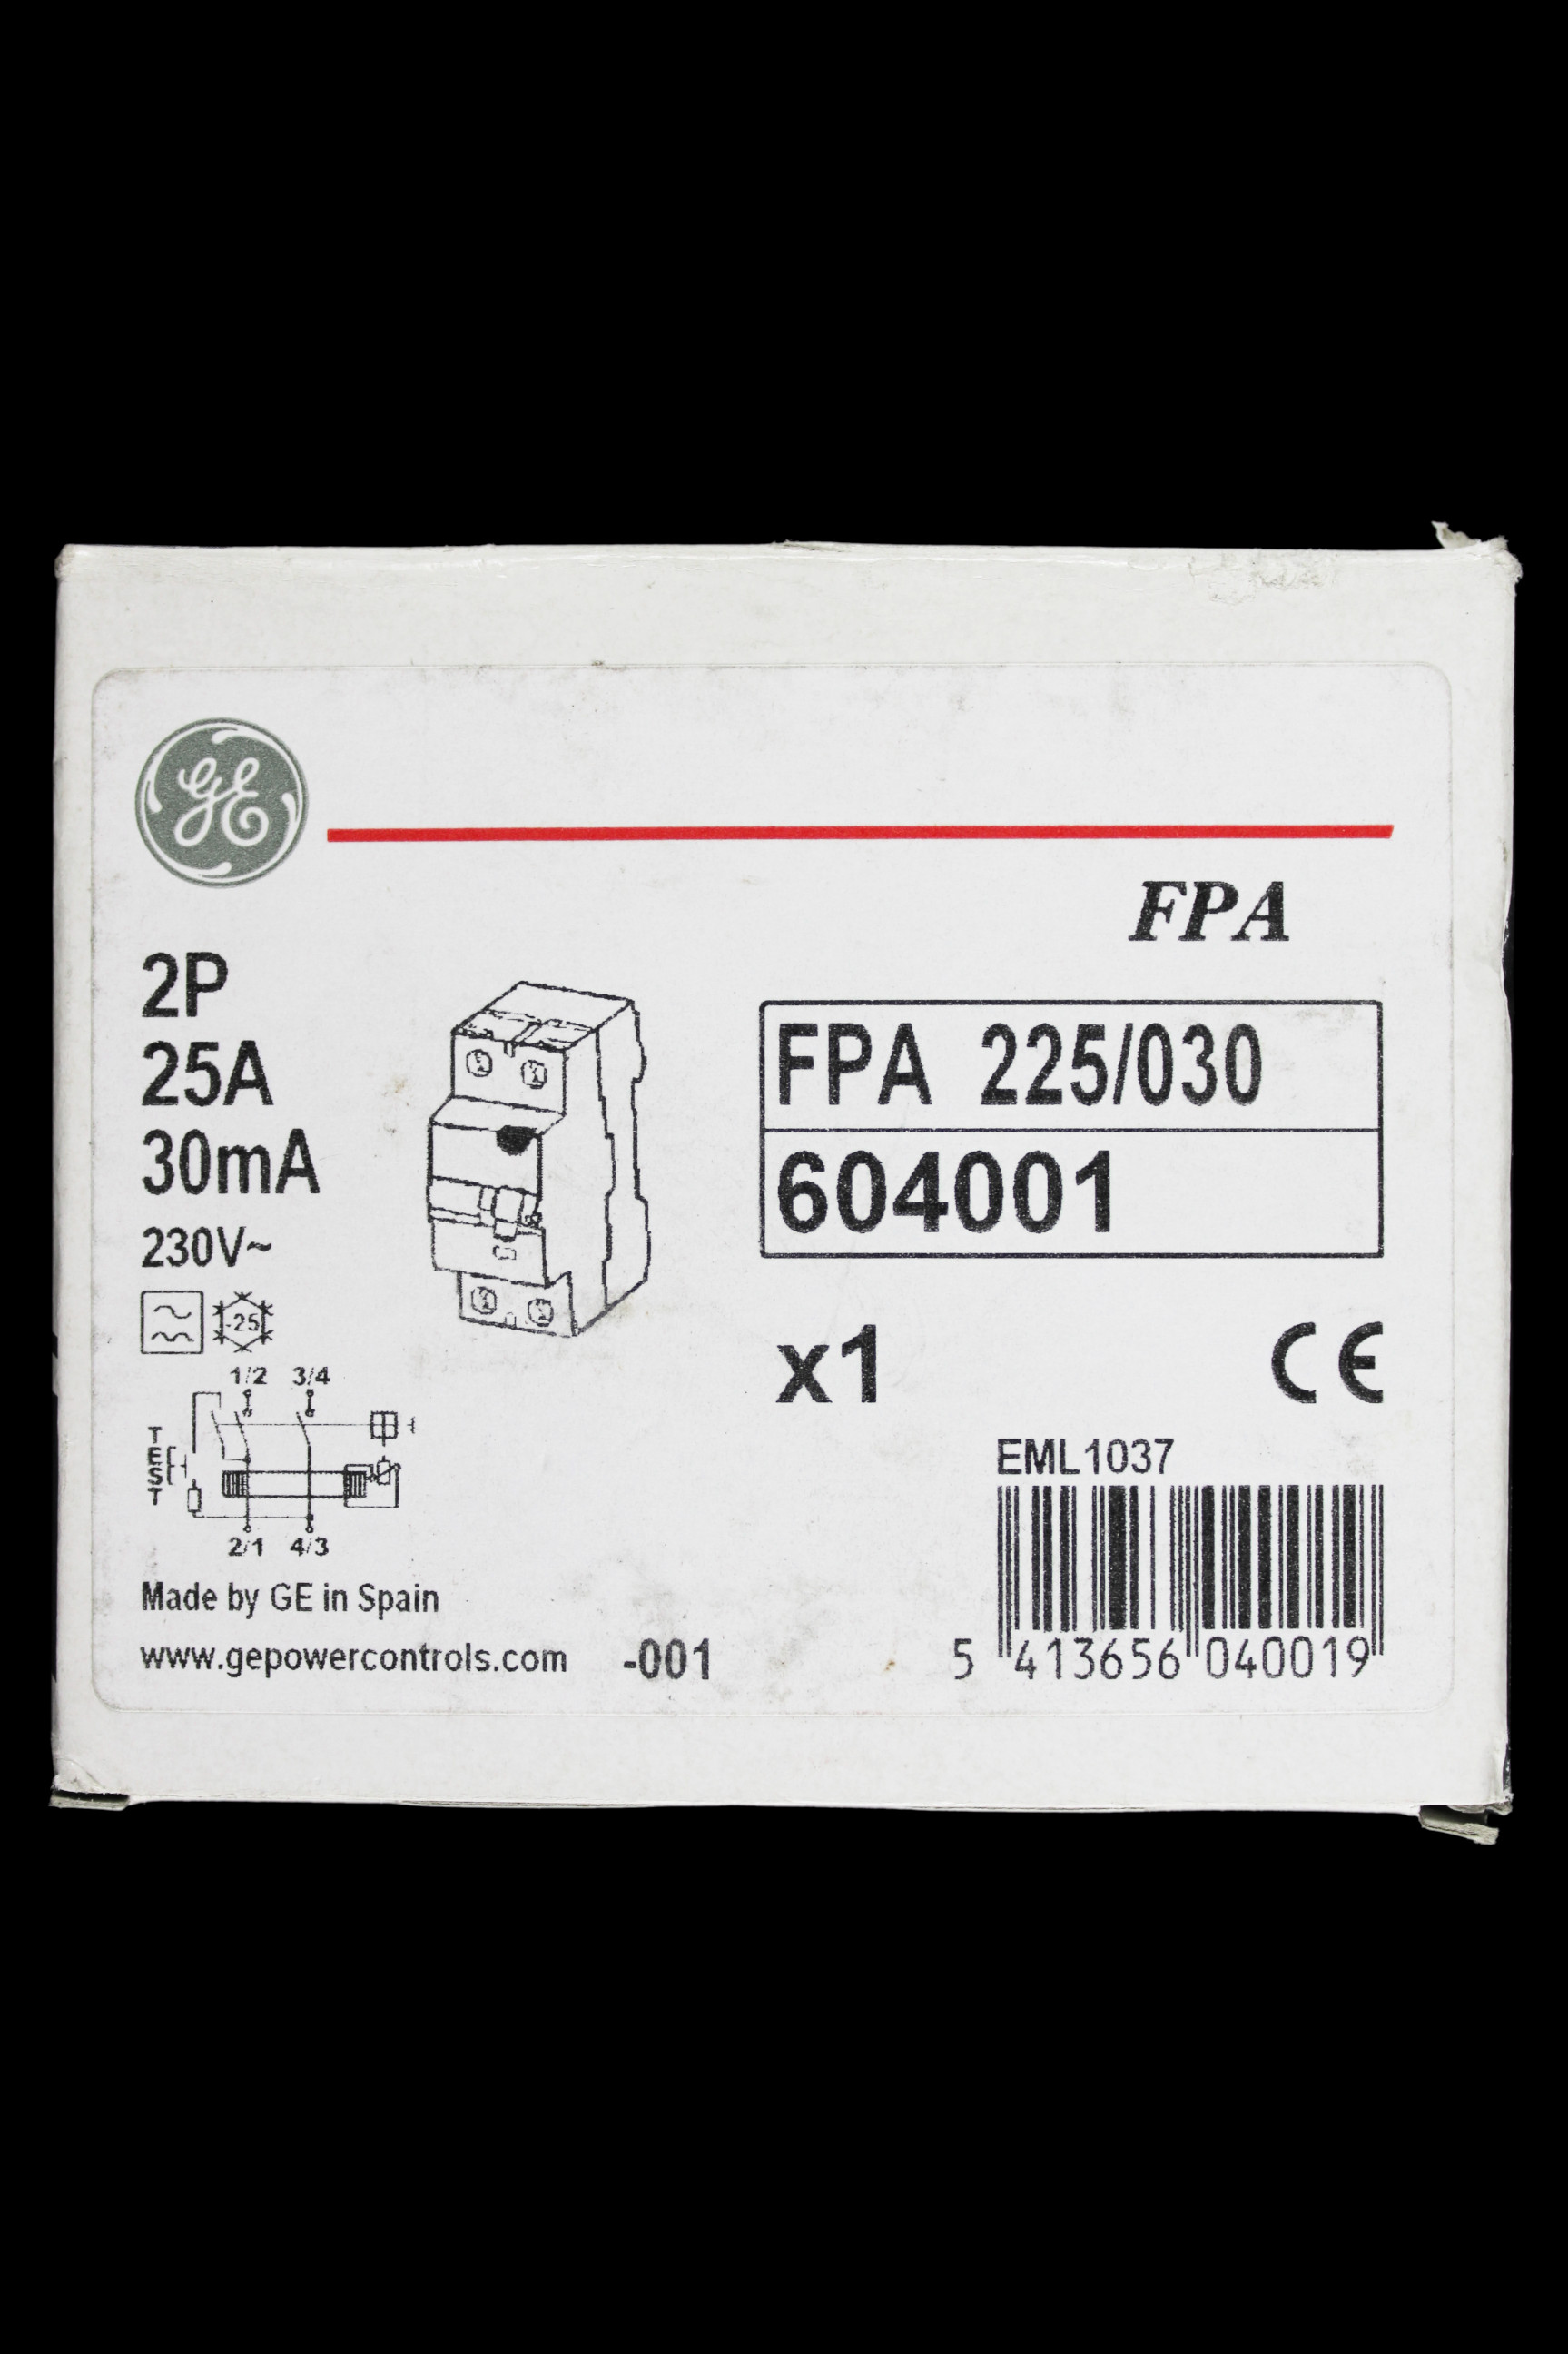 GENERAL ELECTRIC 25 AMP 30mA DOUBLE POLE RCD TYPE A 604001 FPA